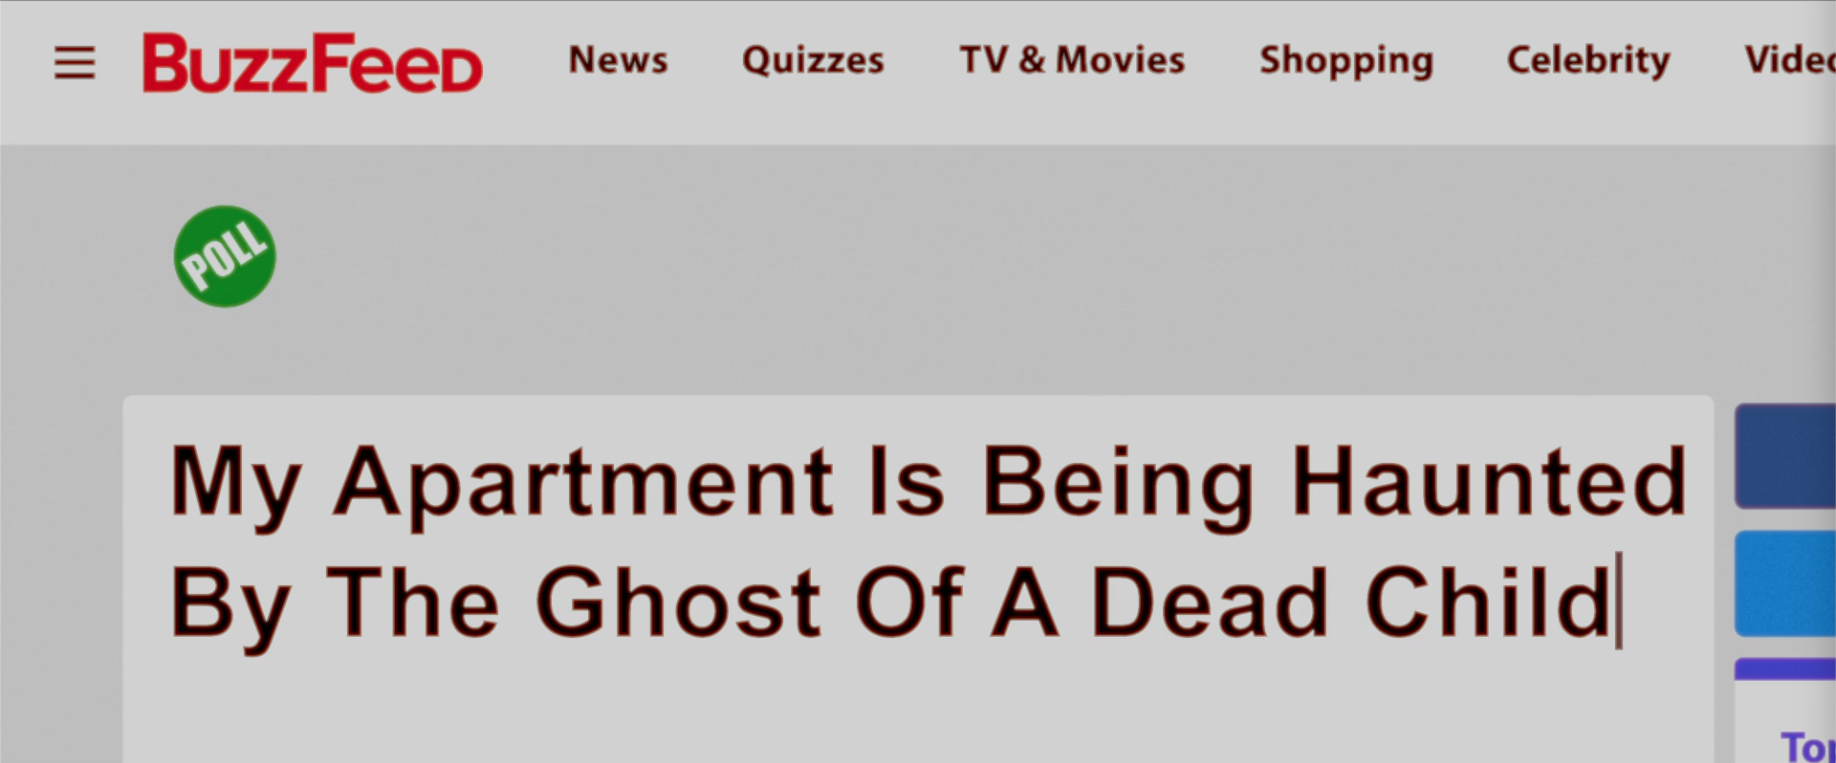 BuzzFeed headline: &quot;My Apartment Is Being Haunted By The Ghost Of A Dead Child&quot;